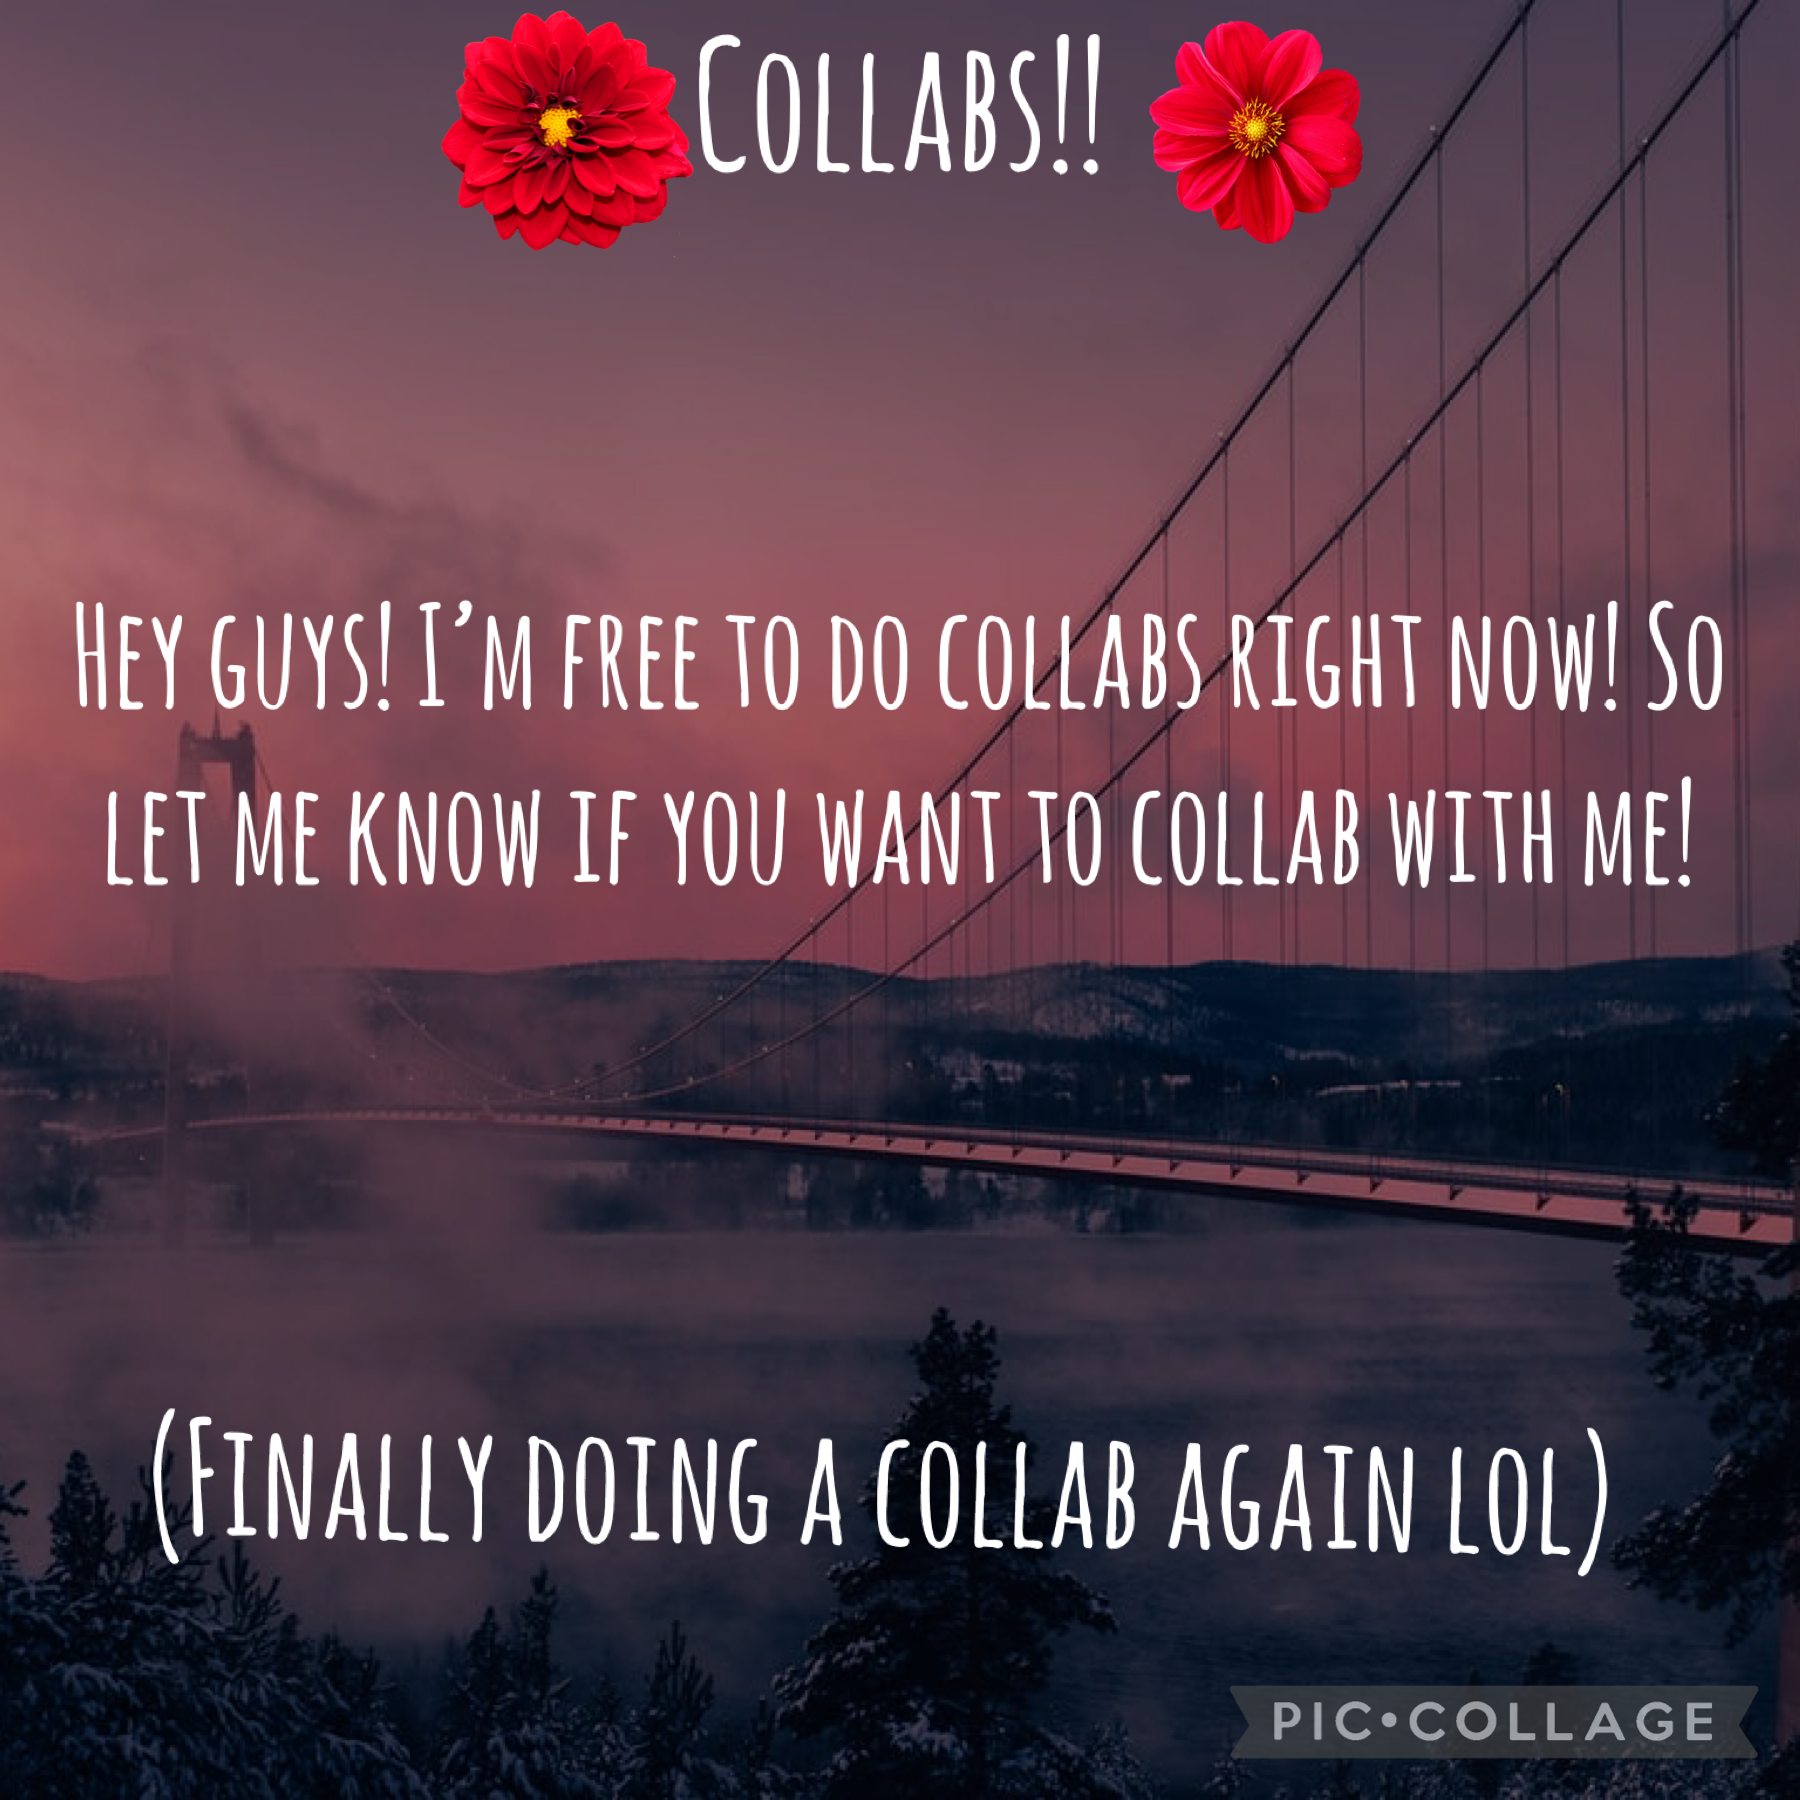 Collabs!! (5/1/21)